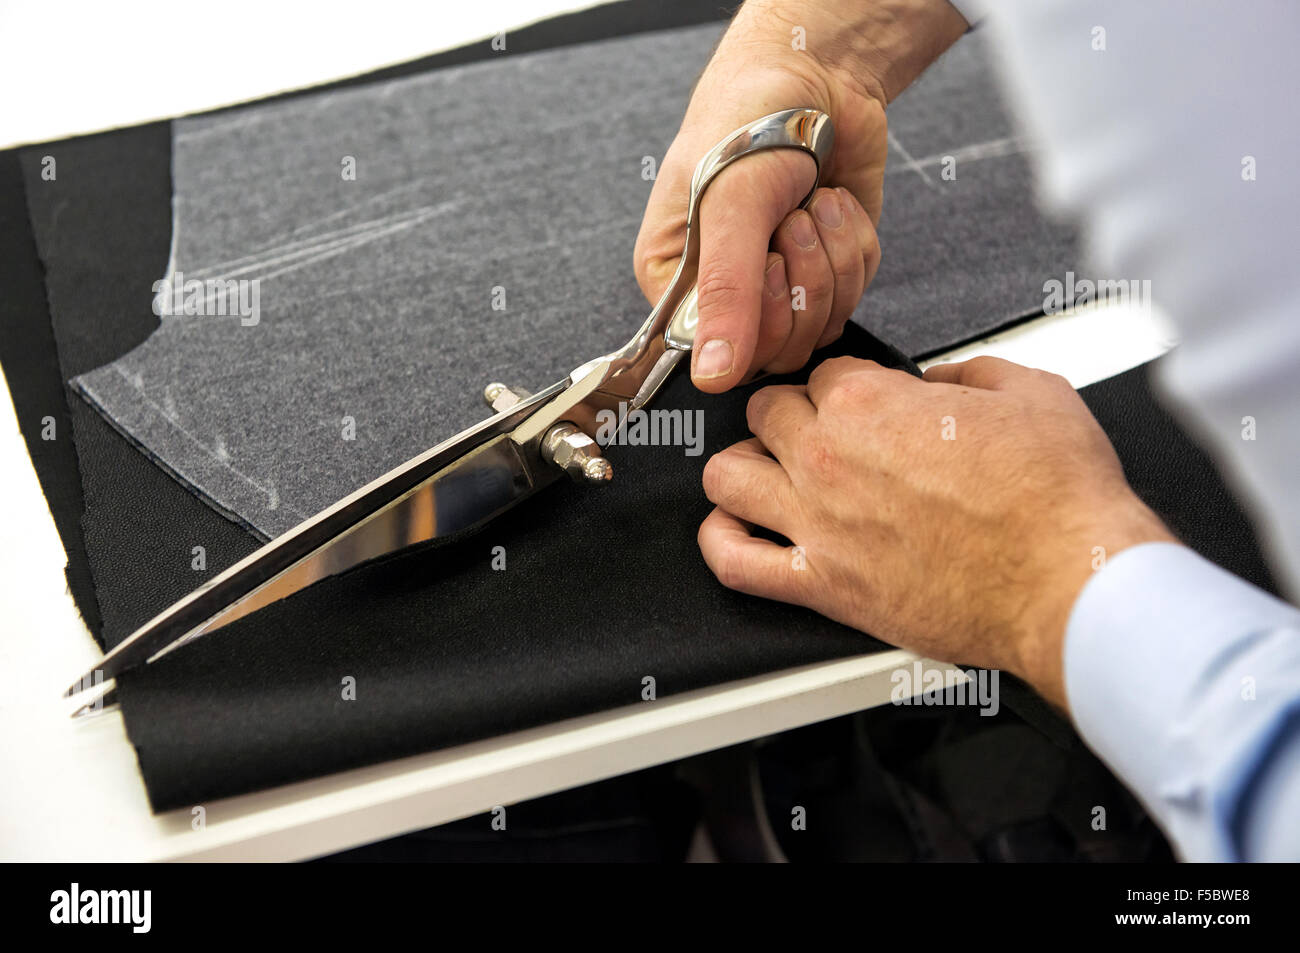 Tailor cutting fabric with shears Stock Photo